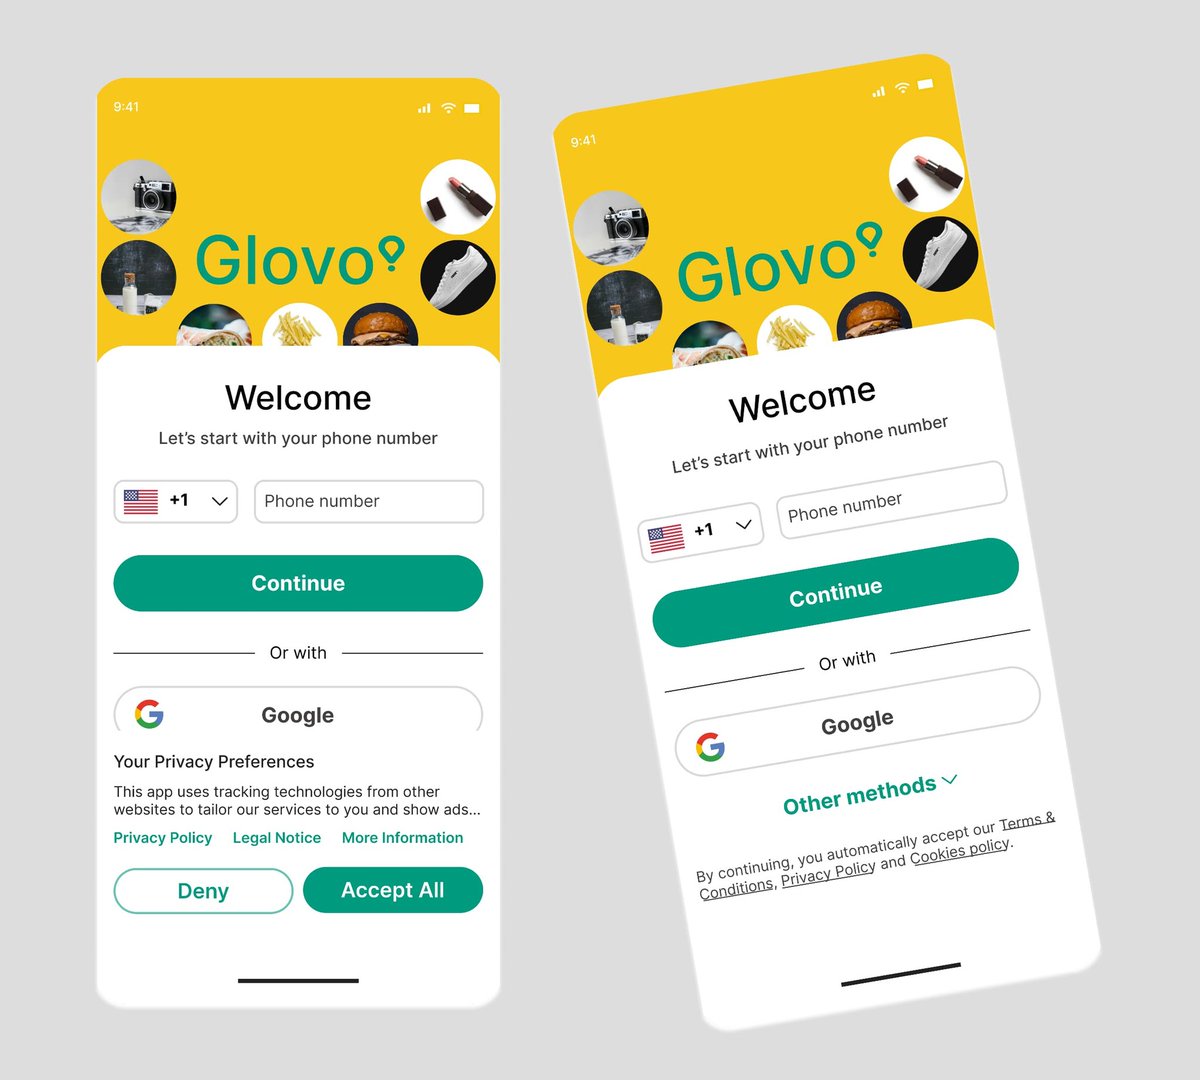 Day 3: I revamped a login page for an E-commerce platform (Glovo) with a focus on user experience.
#UIDesign #DesignJourney #SimplicityAndElegance #Uidesignchallenge